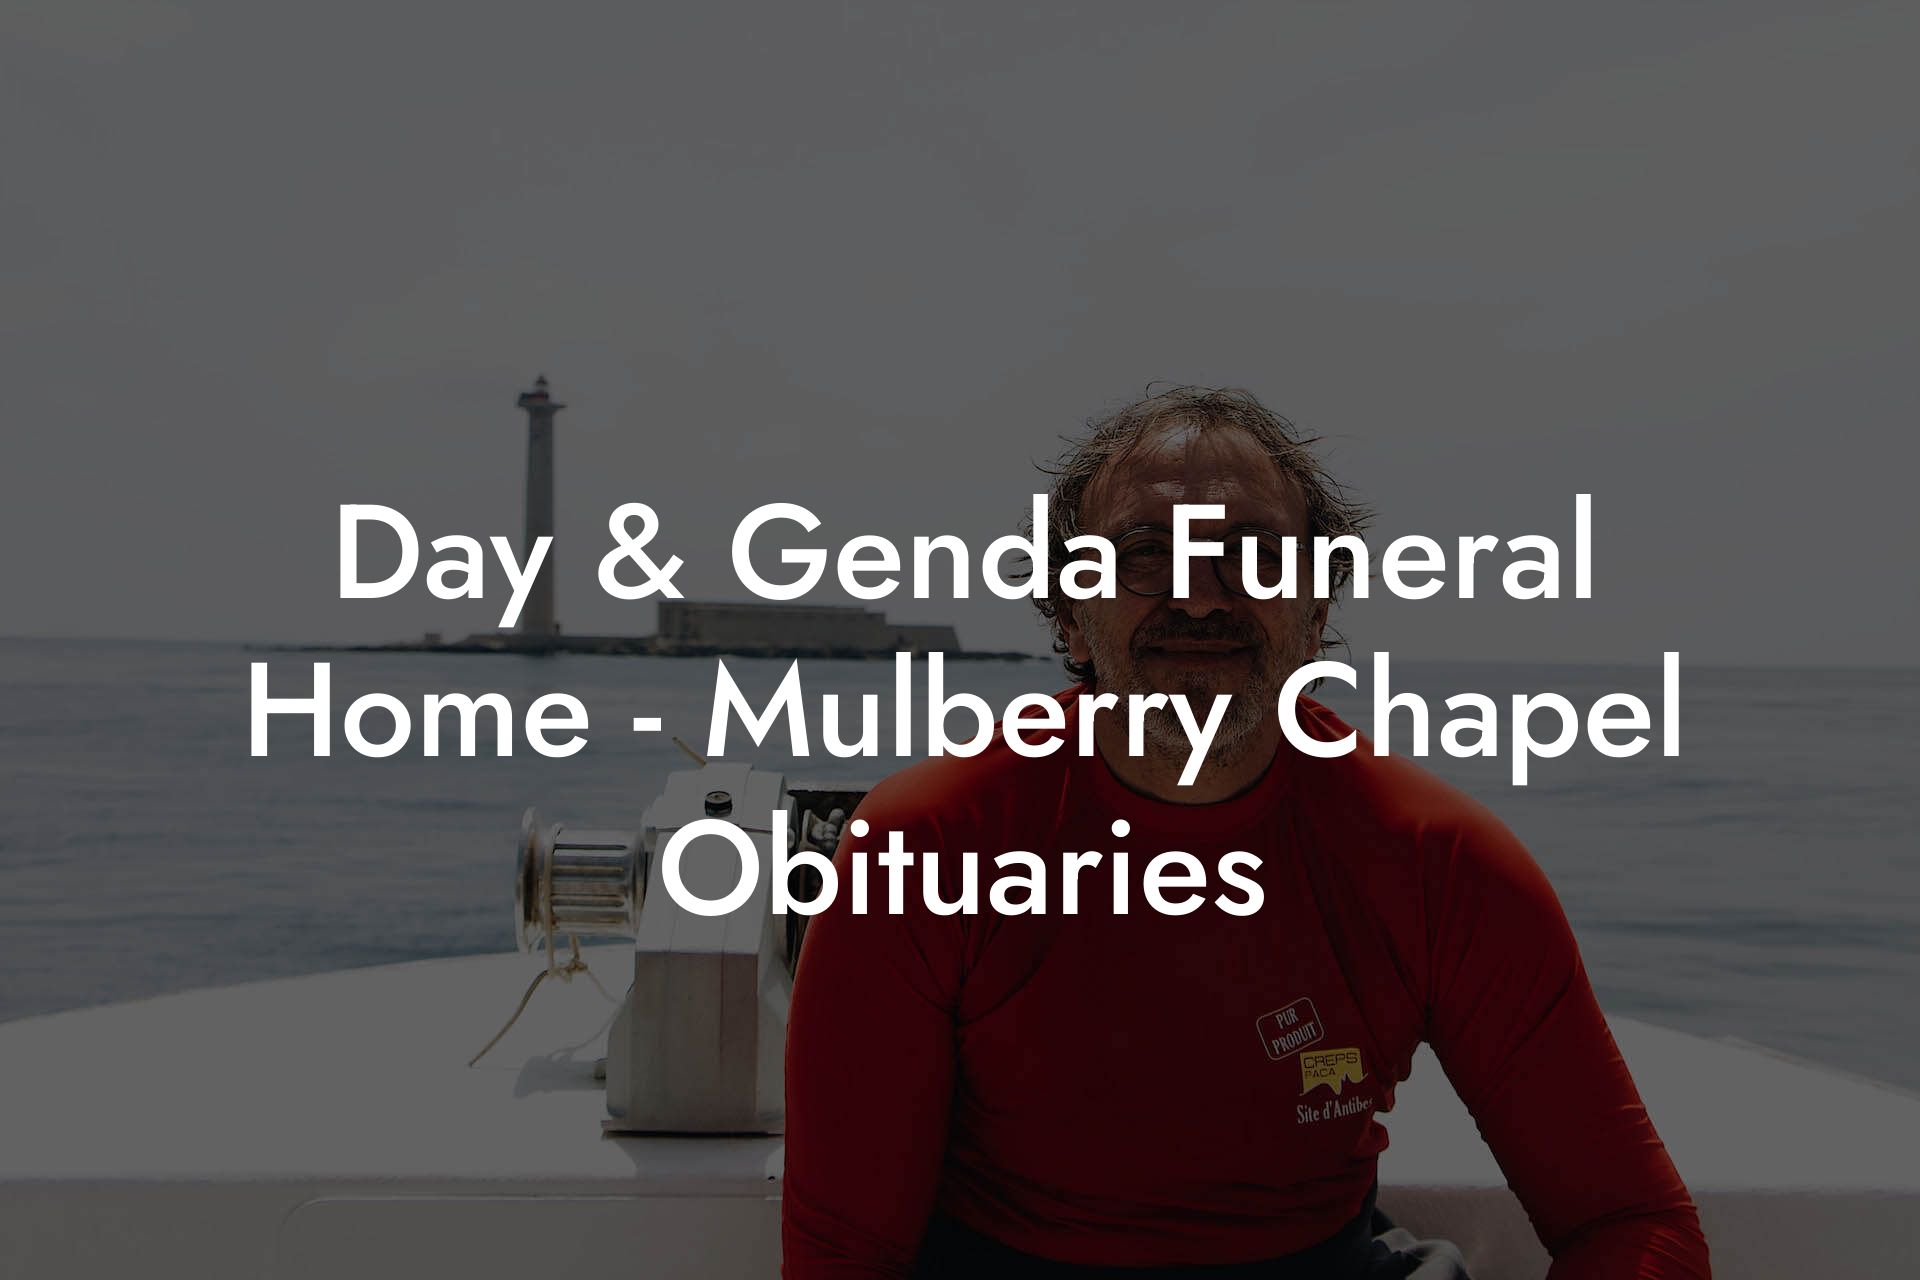 Day & Genda Funeral Home - Mulberry Chapel Obituaries